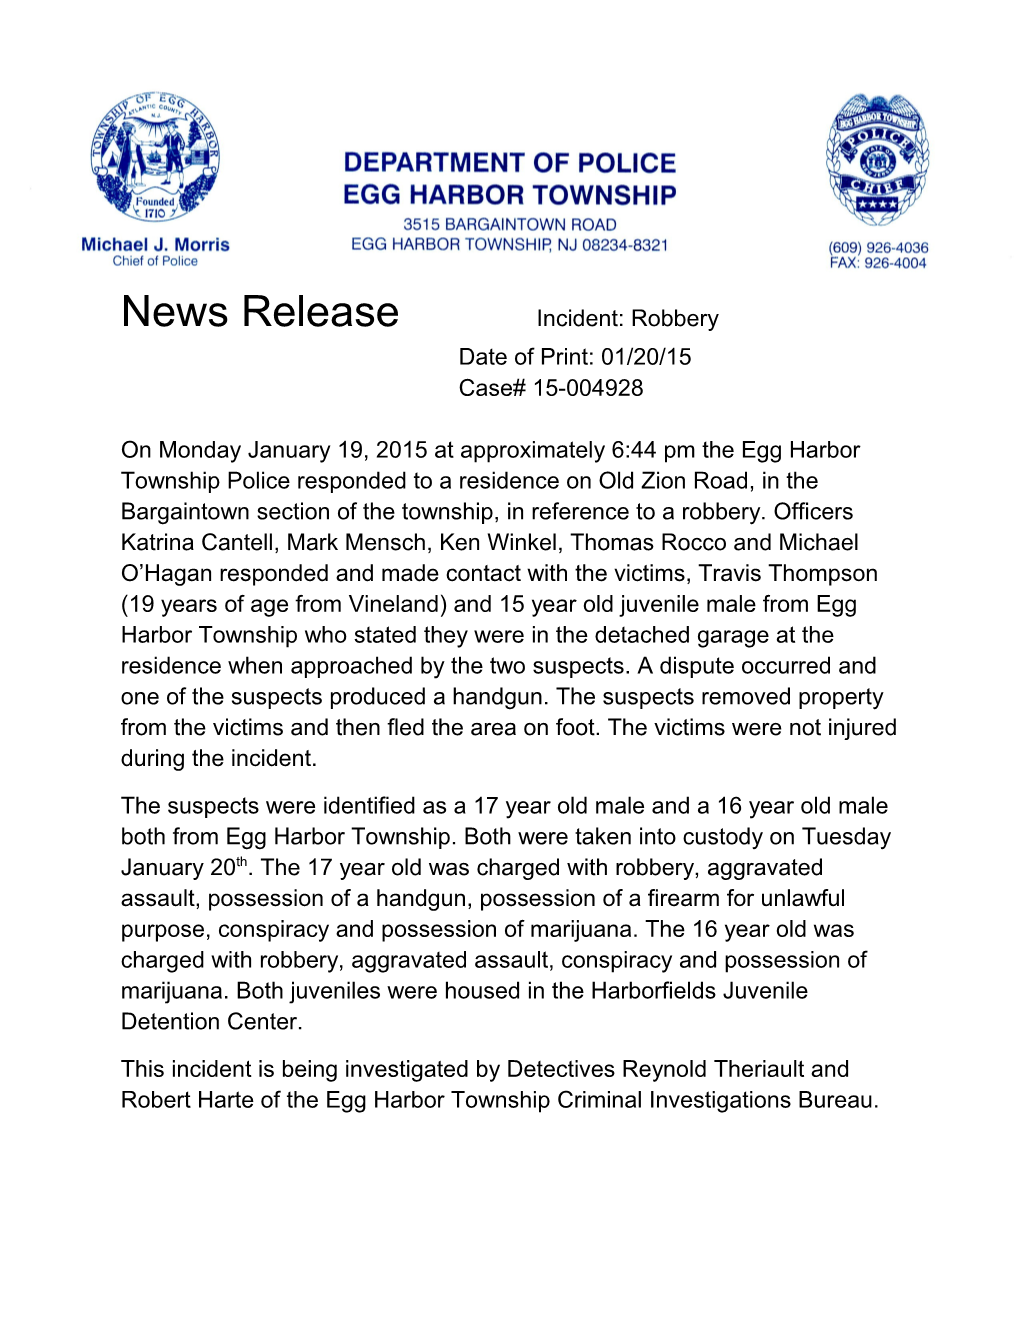 News Release Incident: Robbery Update s2